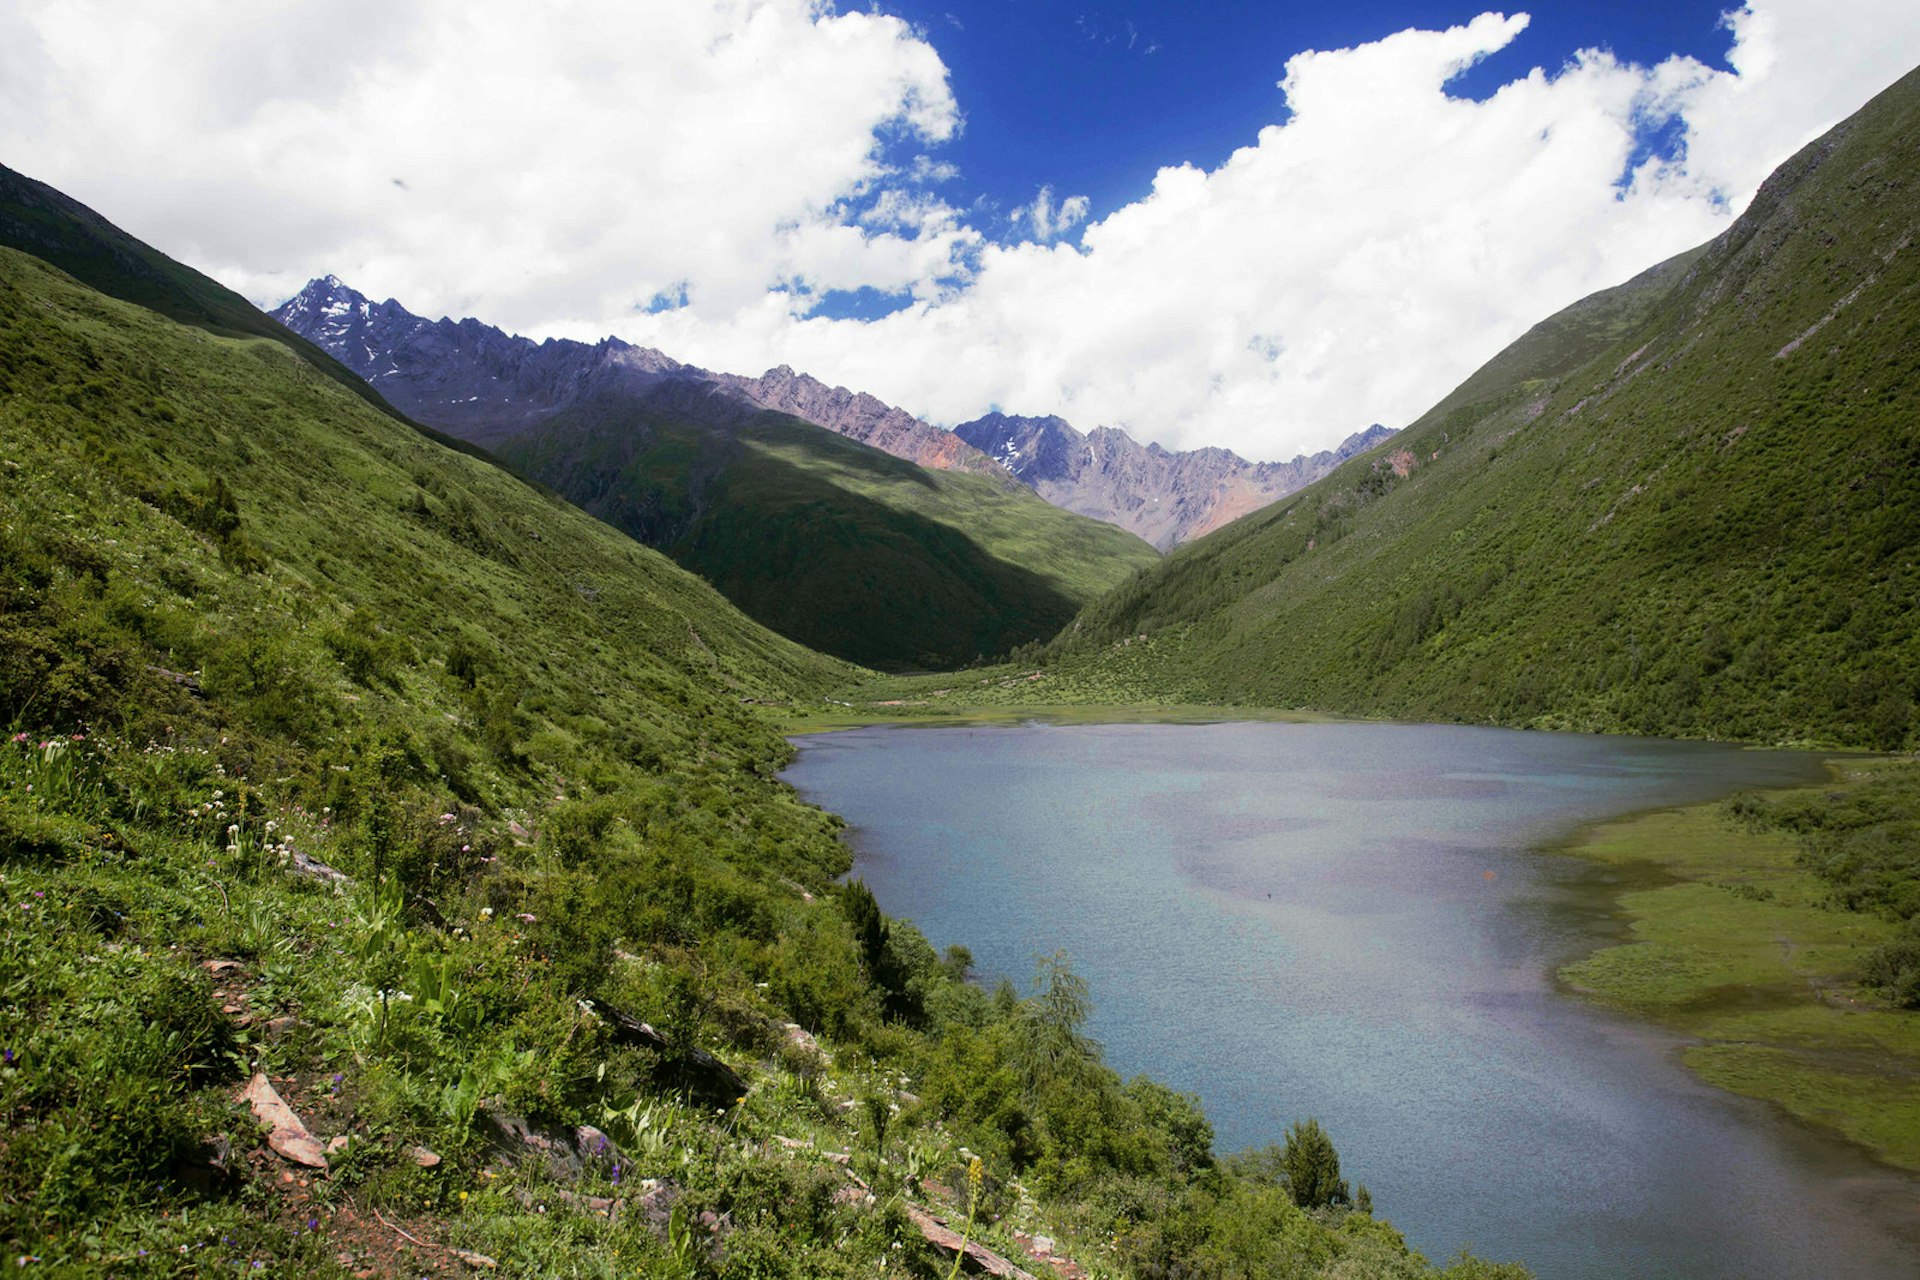 Big Lake, the anchor of most tourists' hikes into the Haizi Valley © Stephen Lioy / Lonely Planet